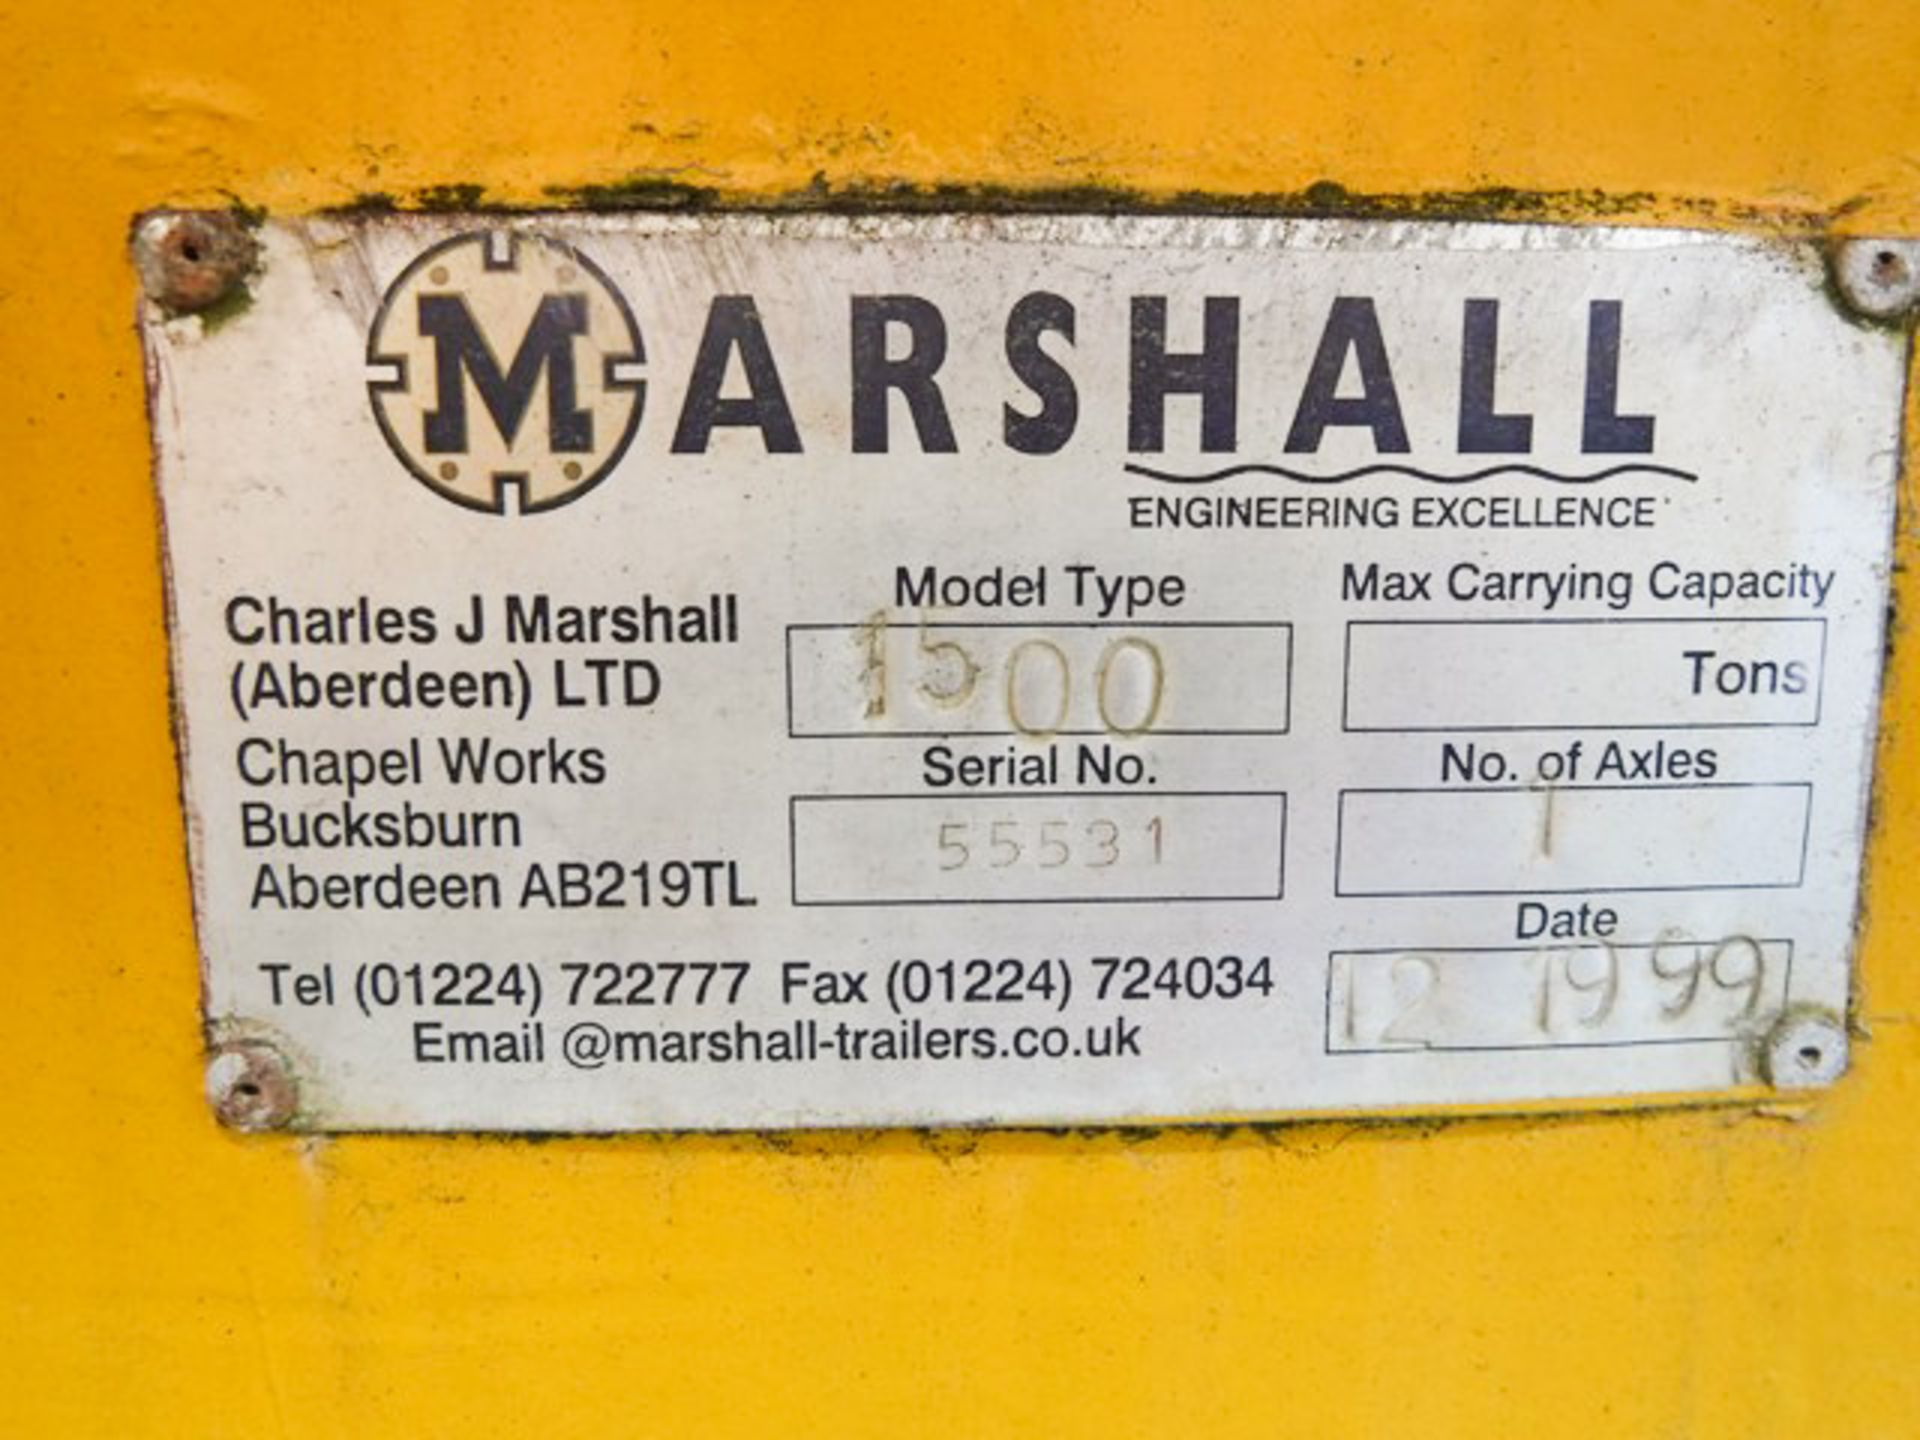 1999 MARSHALL VACUUM TANK, MODEL 1500, S/N 55531, NEW BRAKES, TYRES & PUMP RECENTLY FITTED - Image 8 of 8